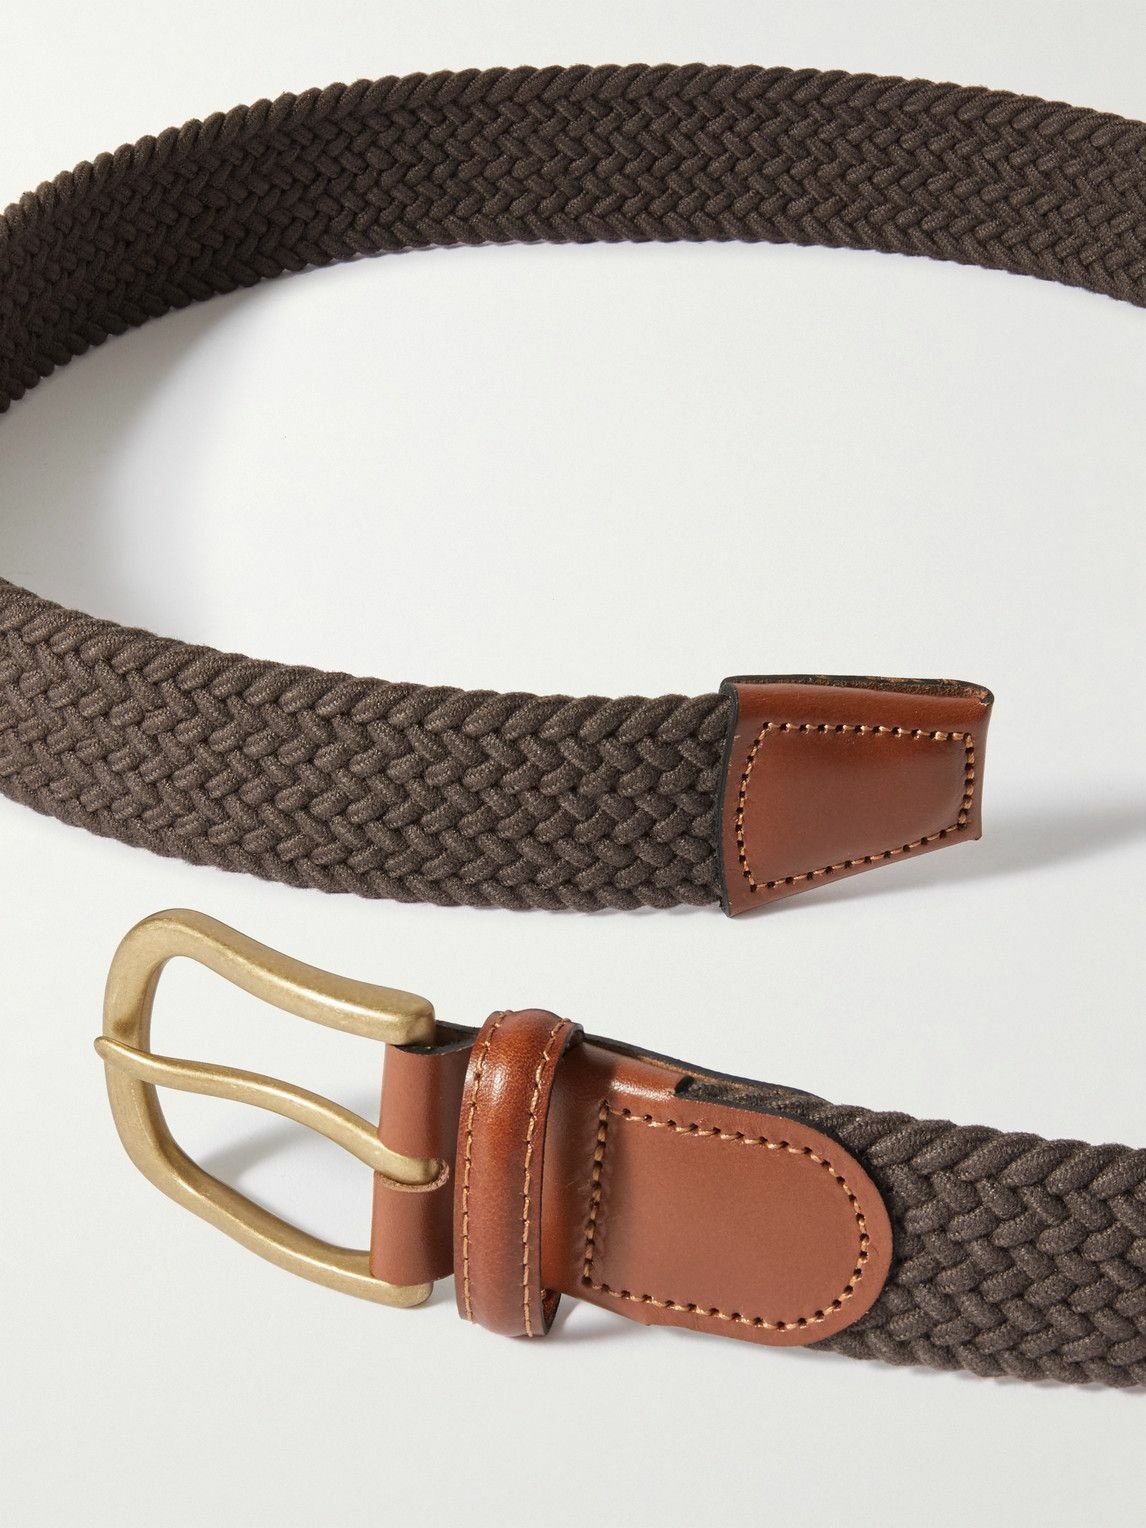 3.5cm Leather-Trimmed Woven Stretch-Cotton Belt